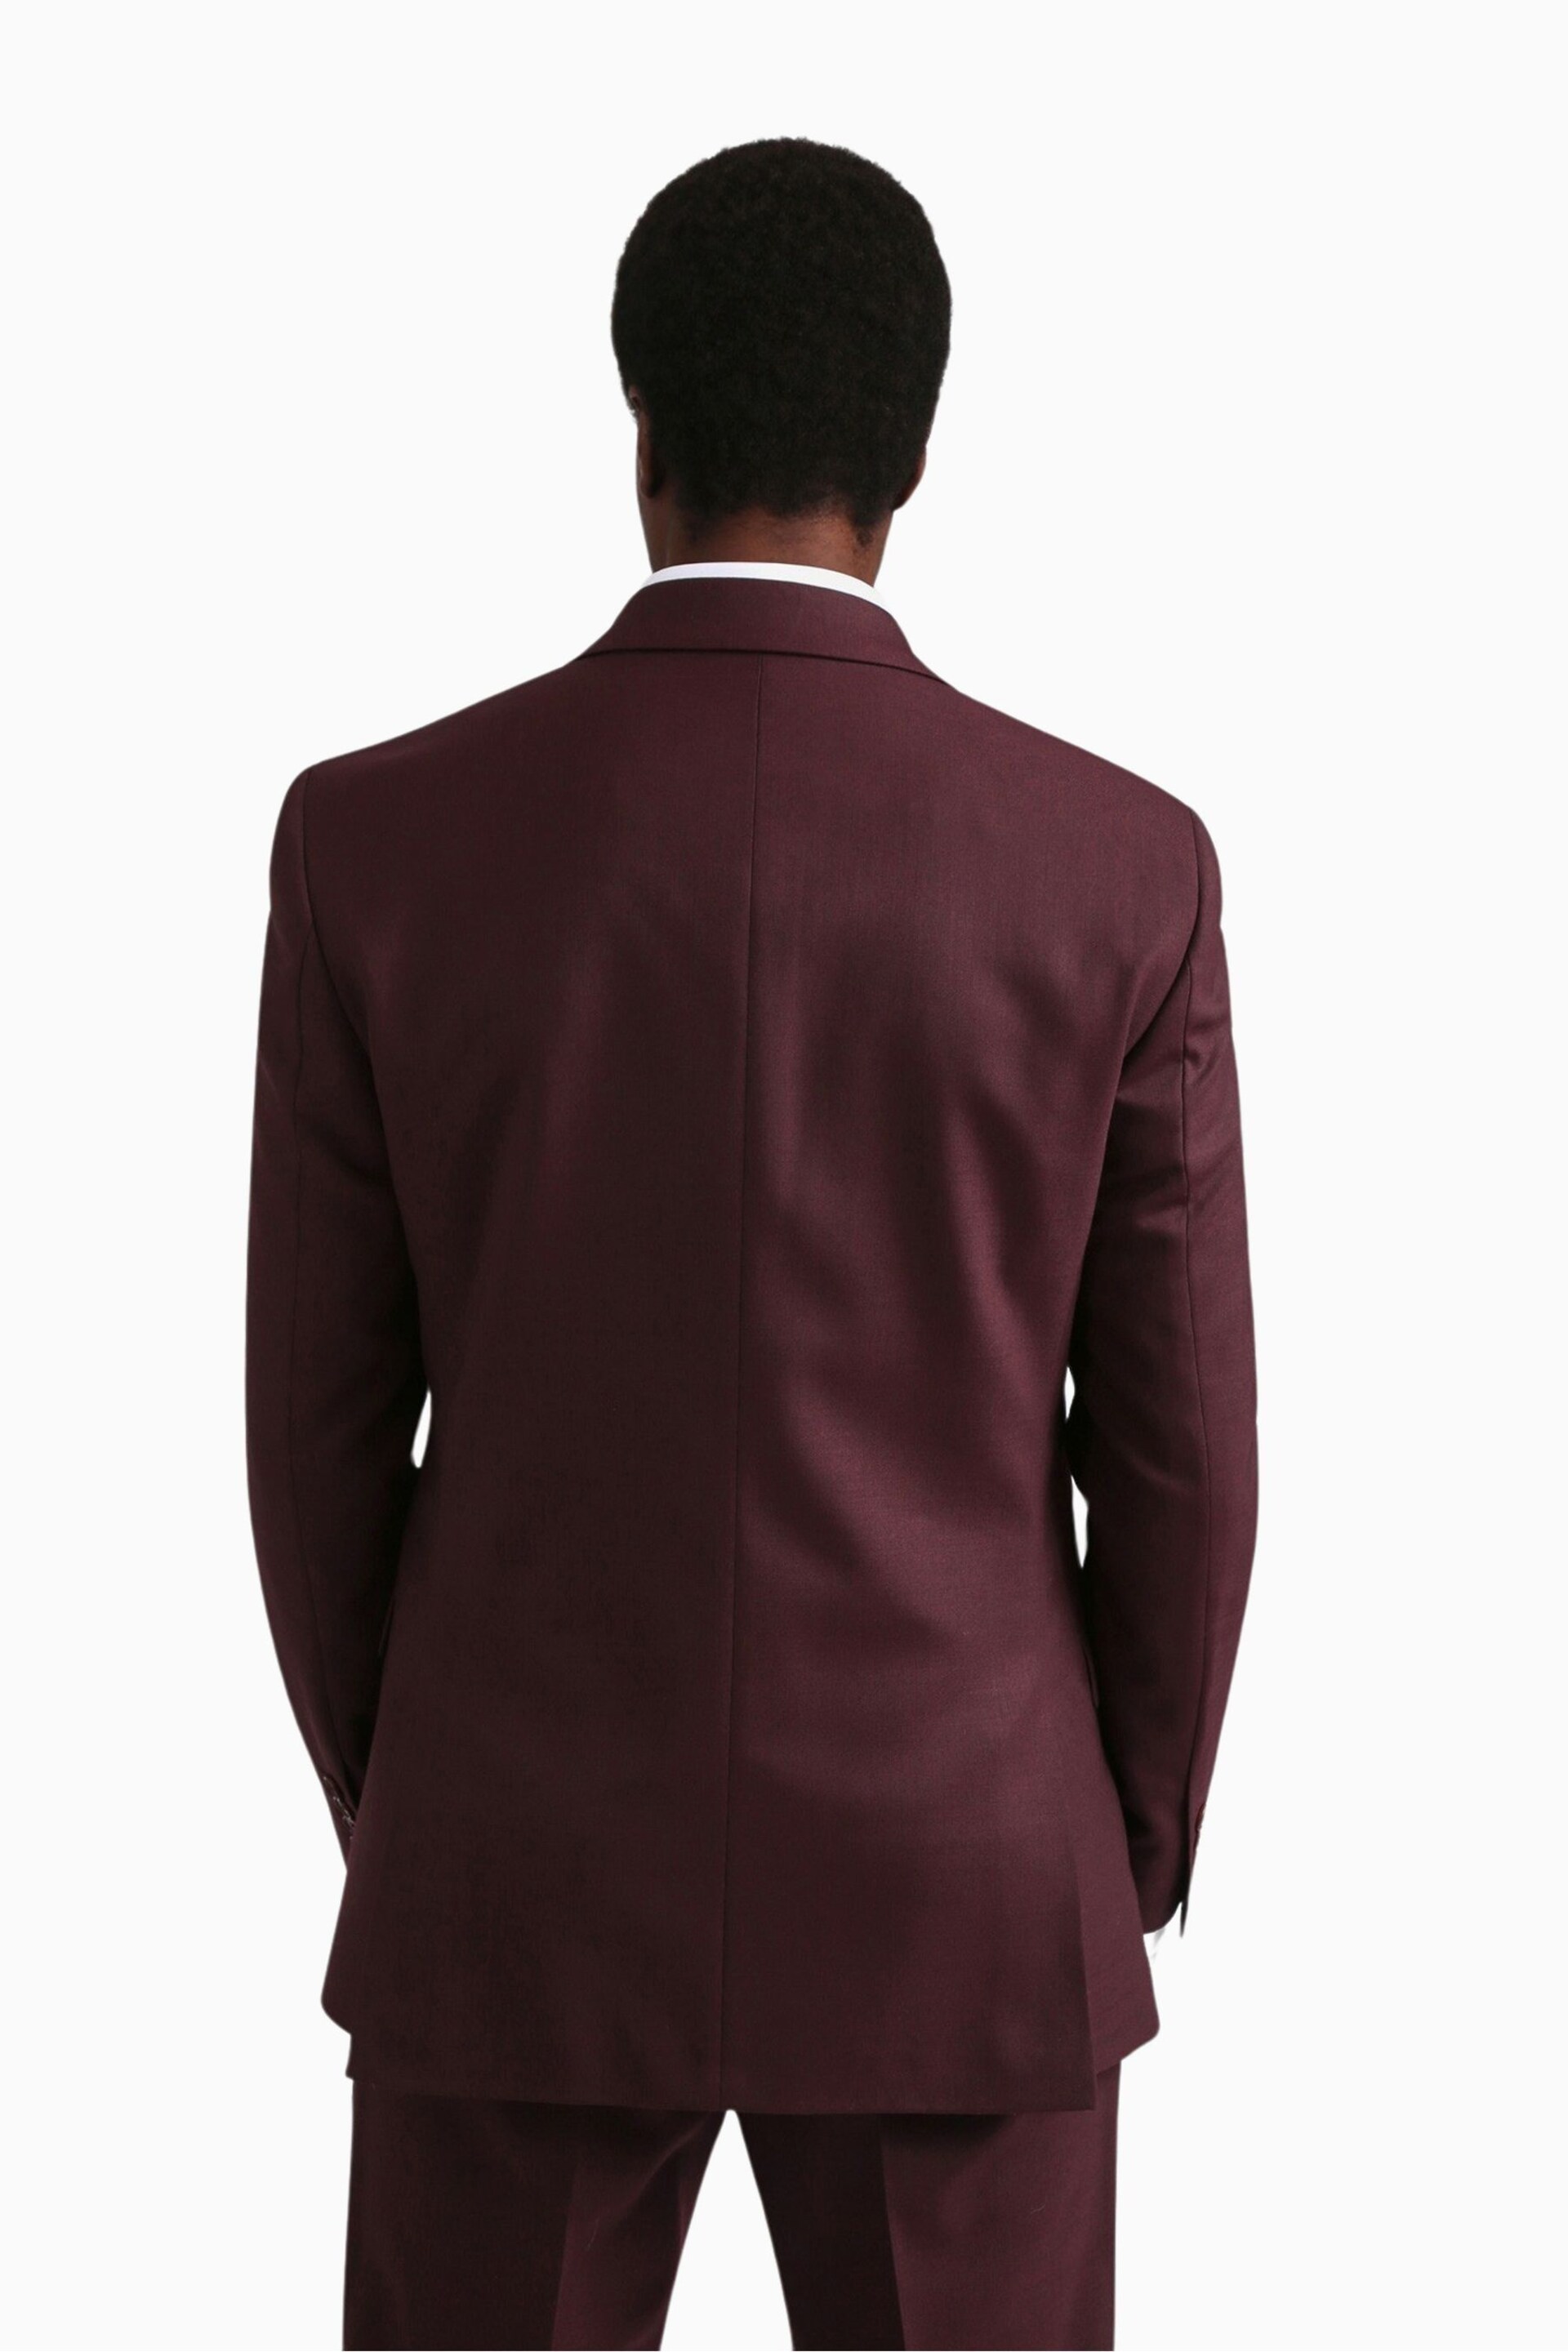 Ted Baker Tailoring Slim Fit Red Keel Twill Jacket - Image 2 of 7